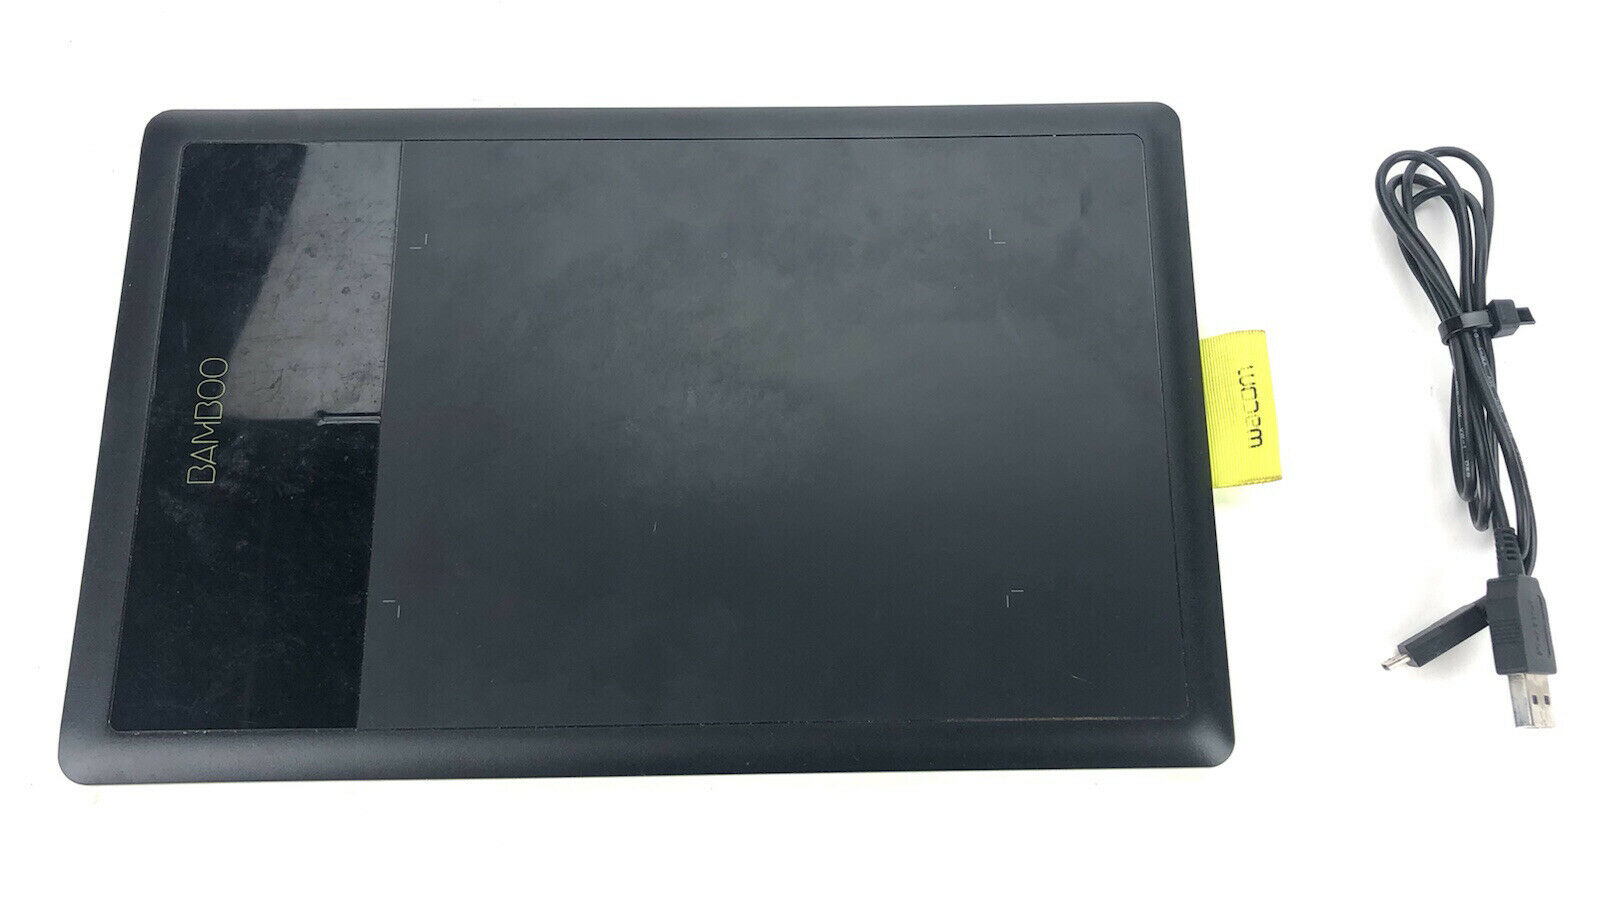 Wacom Bamboo CTL-470 USB Graphics Drawing Tablet and Cable - Tested